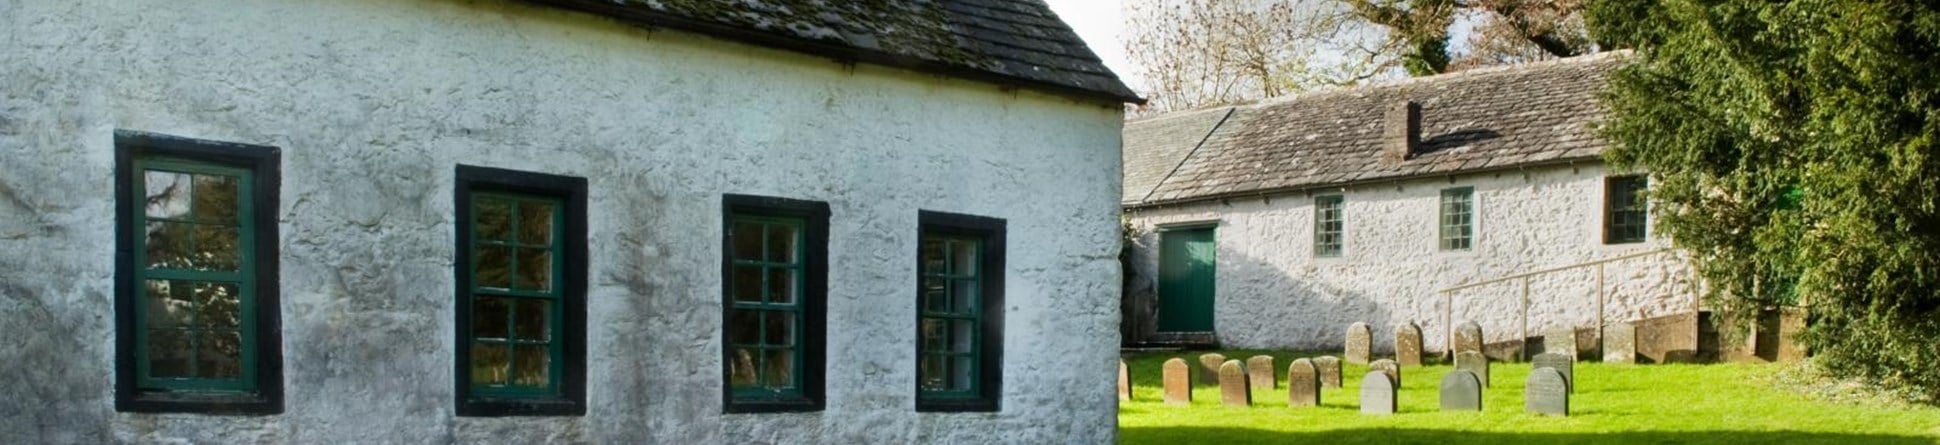 Exterior shot of Pardshaw meeting house with white walls and green window frames in a burial ground.